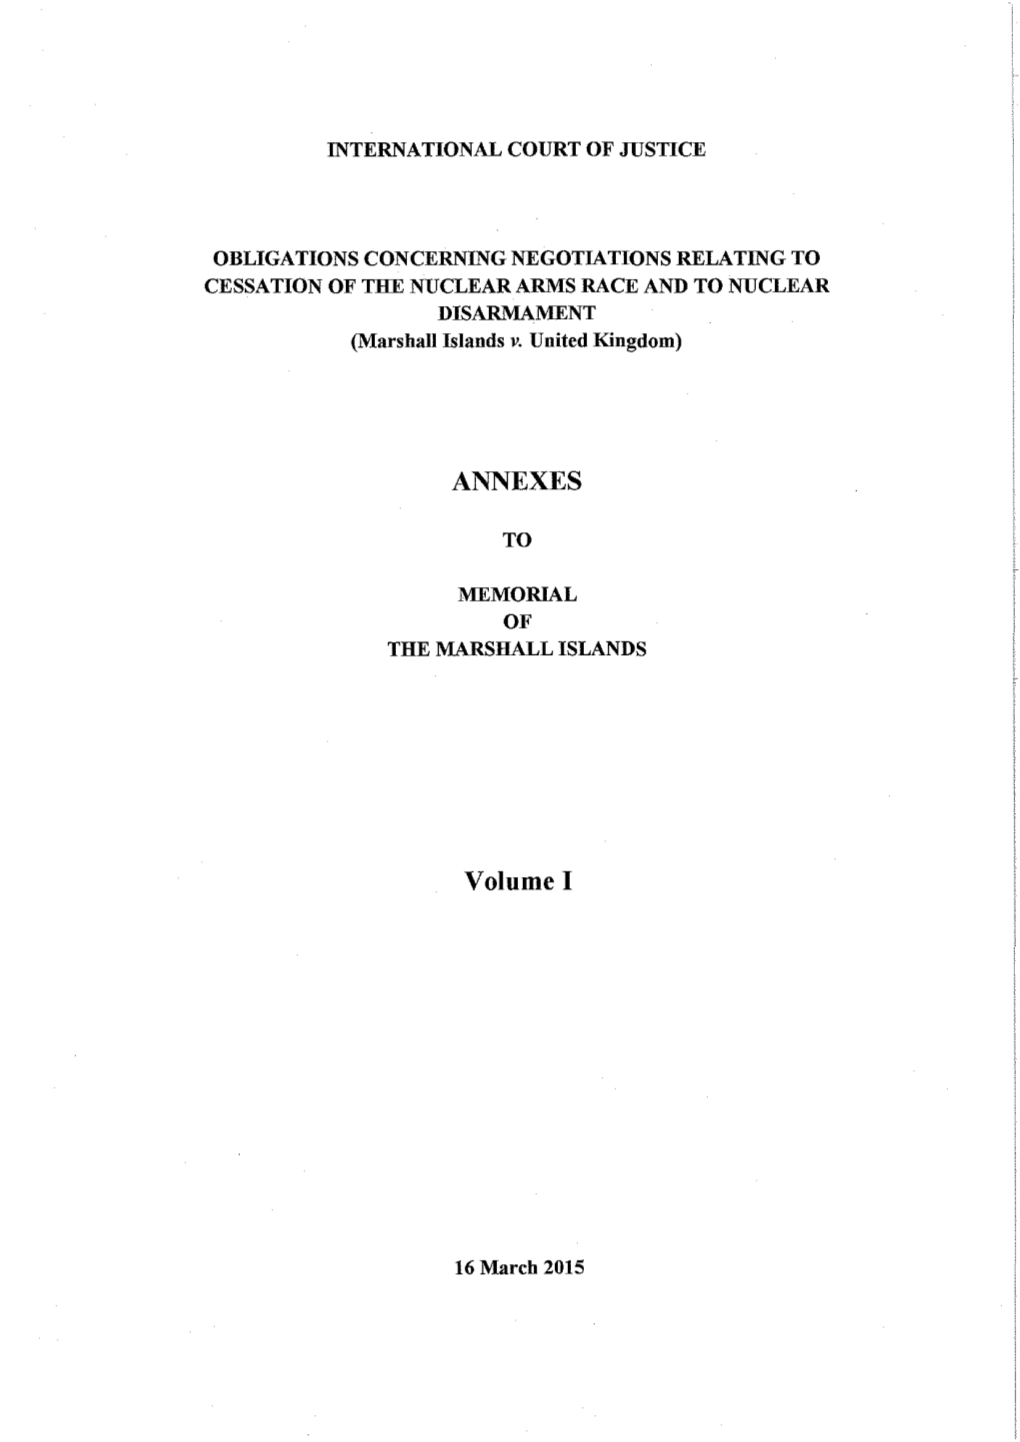 Memorial of the Marshall Islands | Annexes Volume I